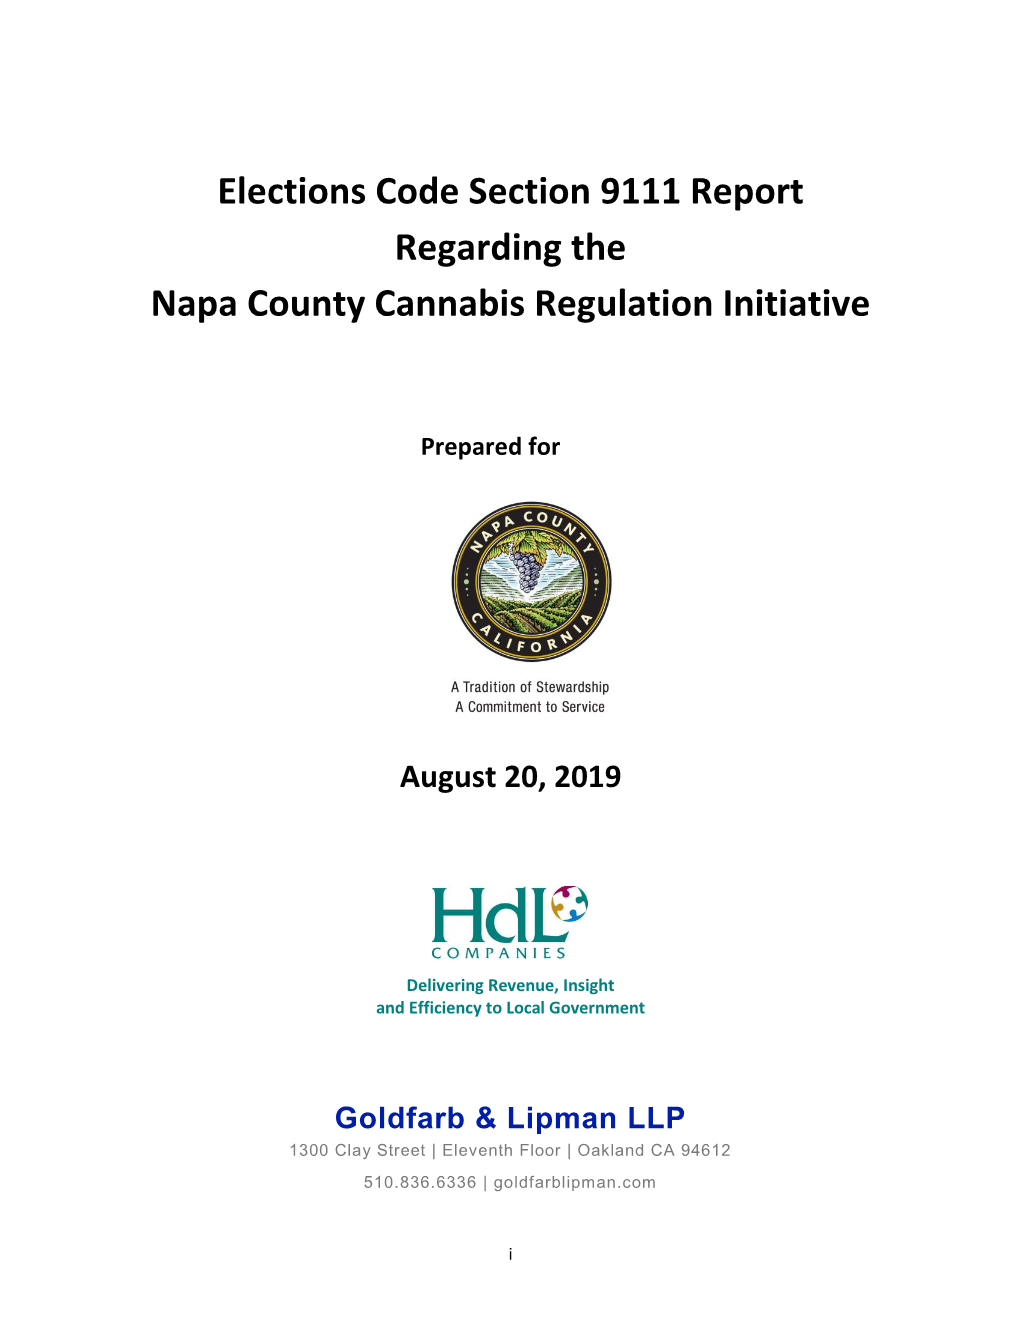 Elections Code Section 9111 Report Regarding the Napa County Cannabis Regulation Initiative